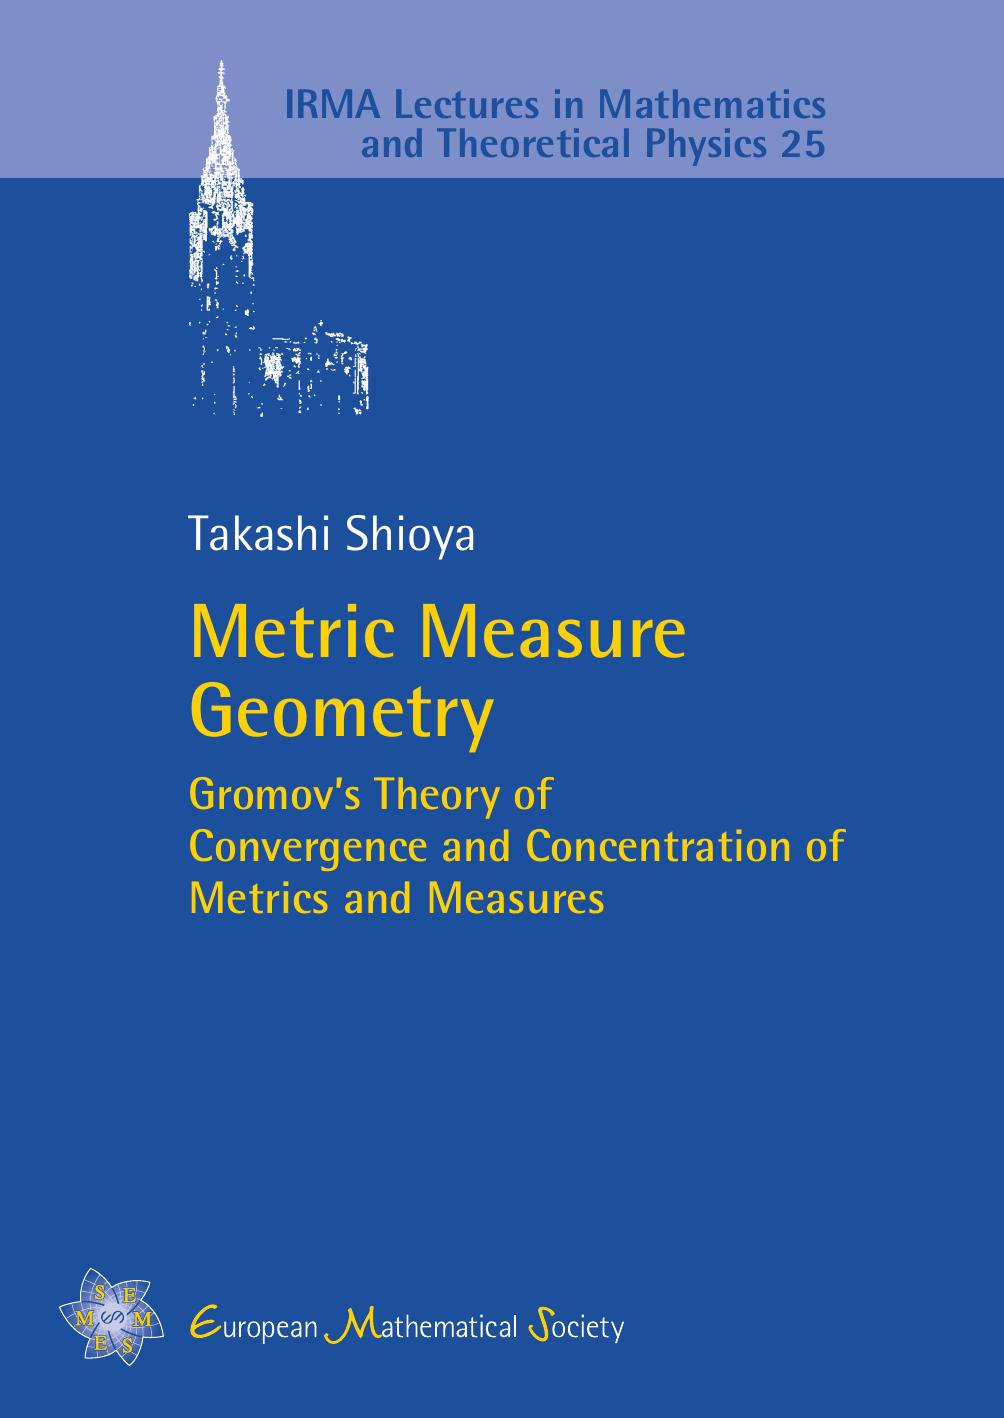 Metric Measure Geometry: Gromov's Theory of Convergence and Concentration of Metrics and Measures